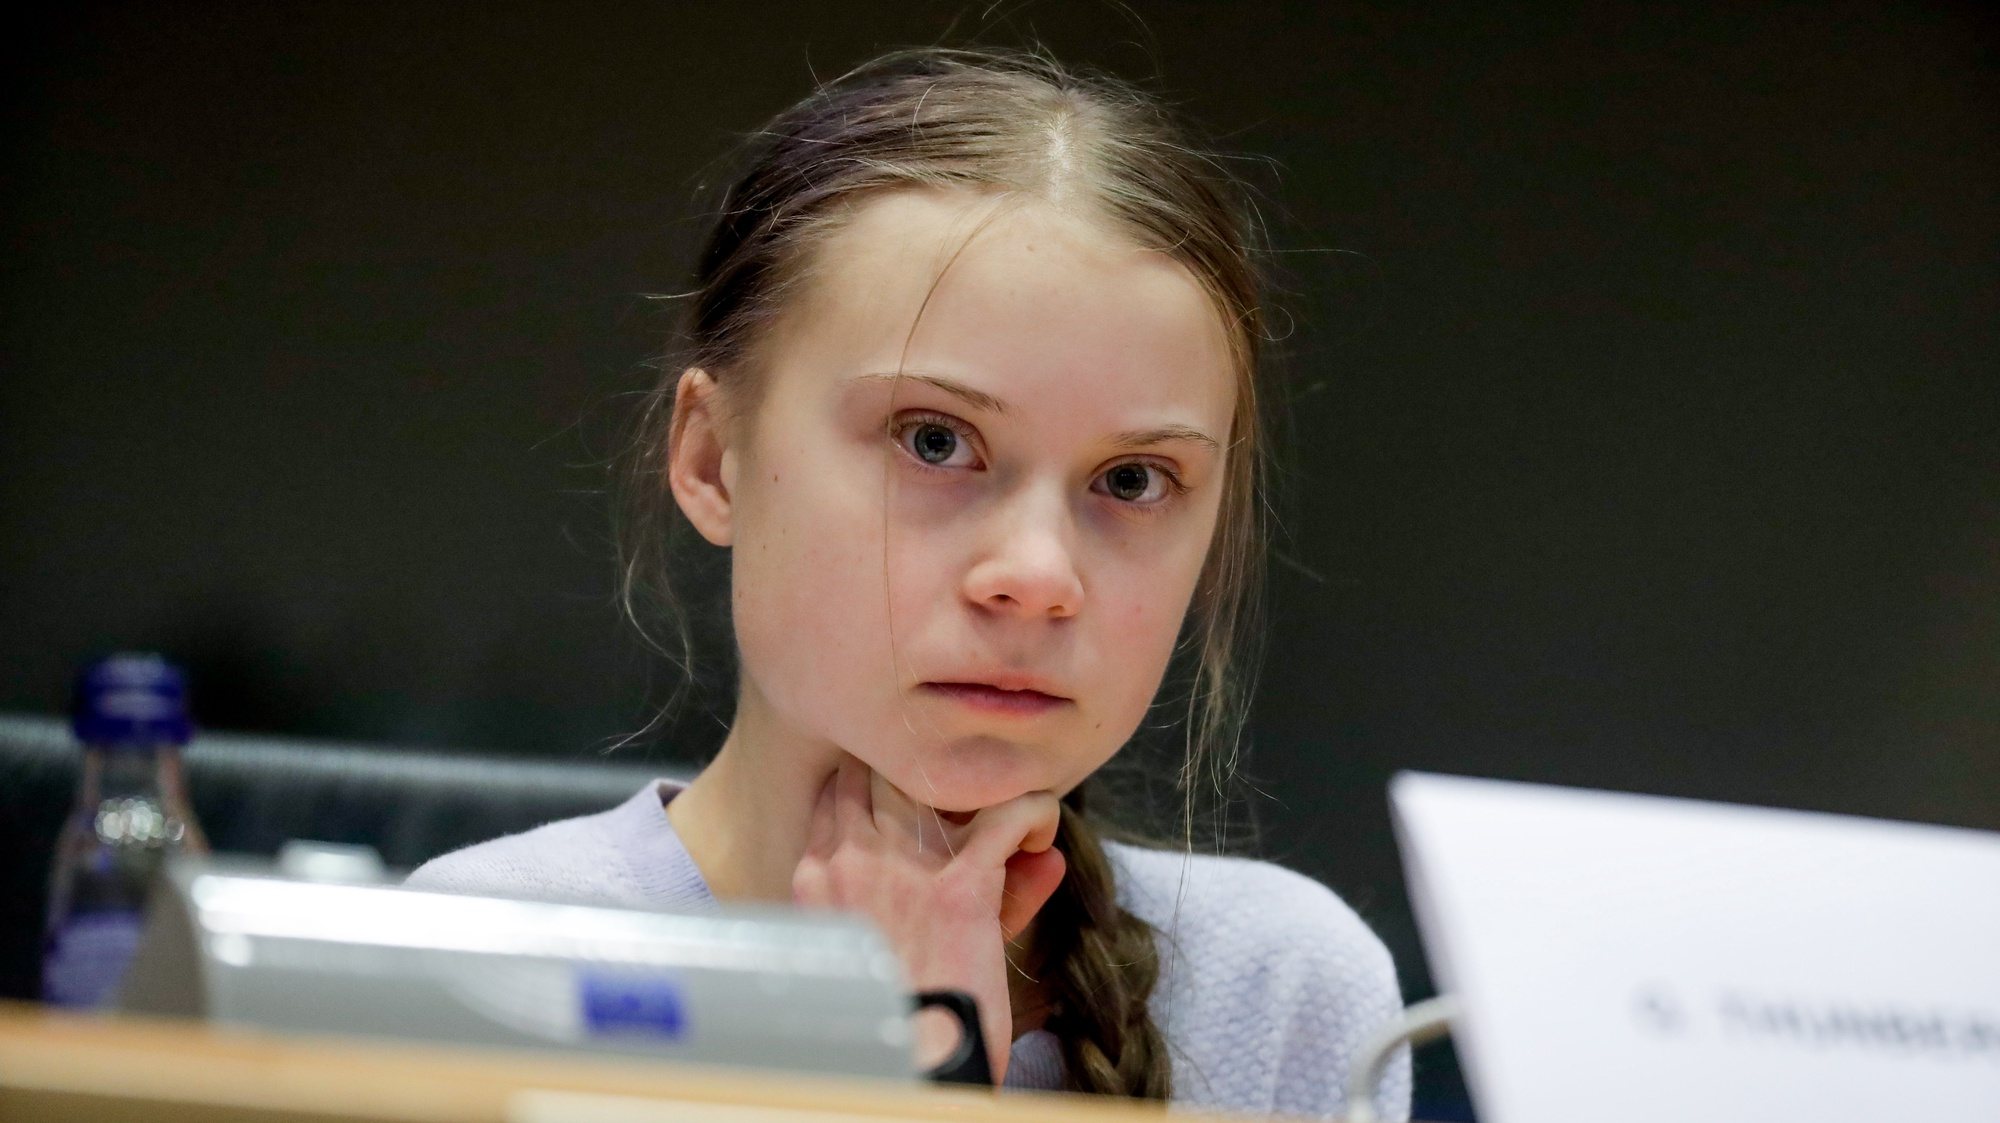 epa08318940 (FILE) -  Swedish climate activist Greta Thunberg attends a Committee on the Environment, Public Health and Food Safety at the  European Parliament in Brussels, Belgium, 04 March 2020 (reissued on 24 March 2020). Greta Thunberg on 24 March shared via her Instagram that she might have had covid-19 as she has experienced mild symptoms of the disease, adding she has been in self-isolation since she came back from her trip around Central Europe. Thunberg didn&#039;t test for covid-19, because in Sweden only people who need urgent medical treatment can test for it. The young activist also encouraged people all over the world to follow the advice of their local experts and authorities and stay at home to slow the wide spread of the virus.  EPA/STEPHANIE LECOCQ